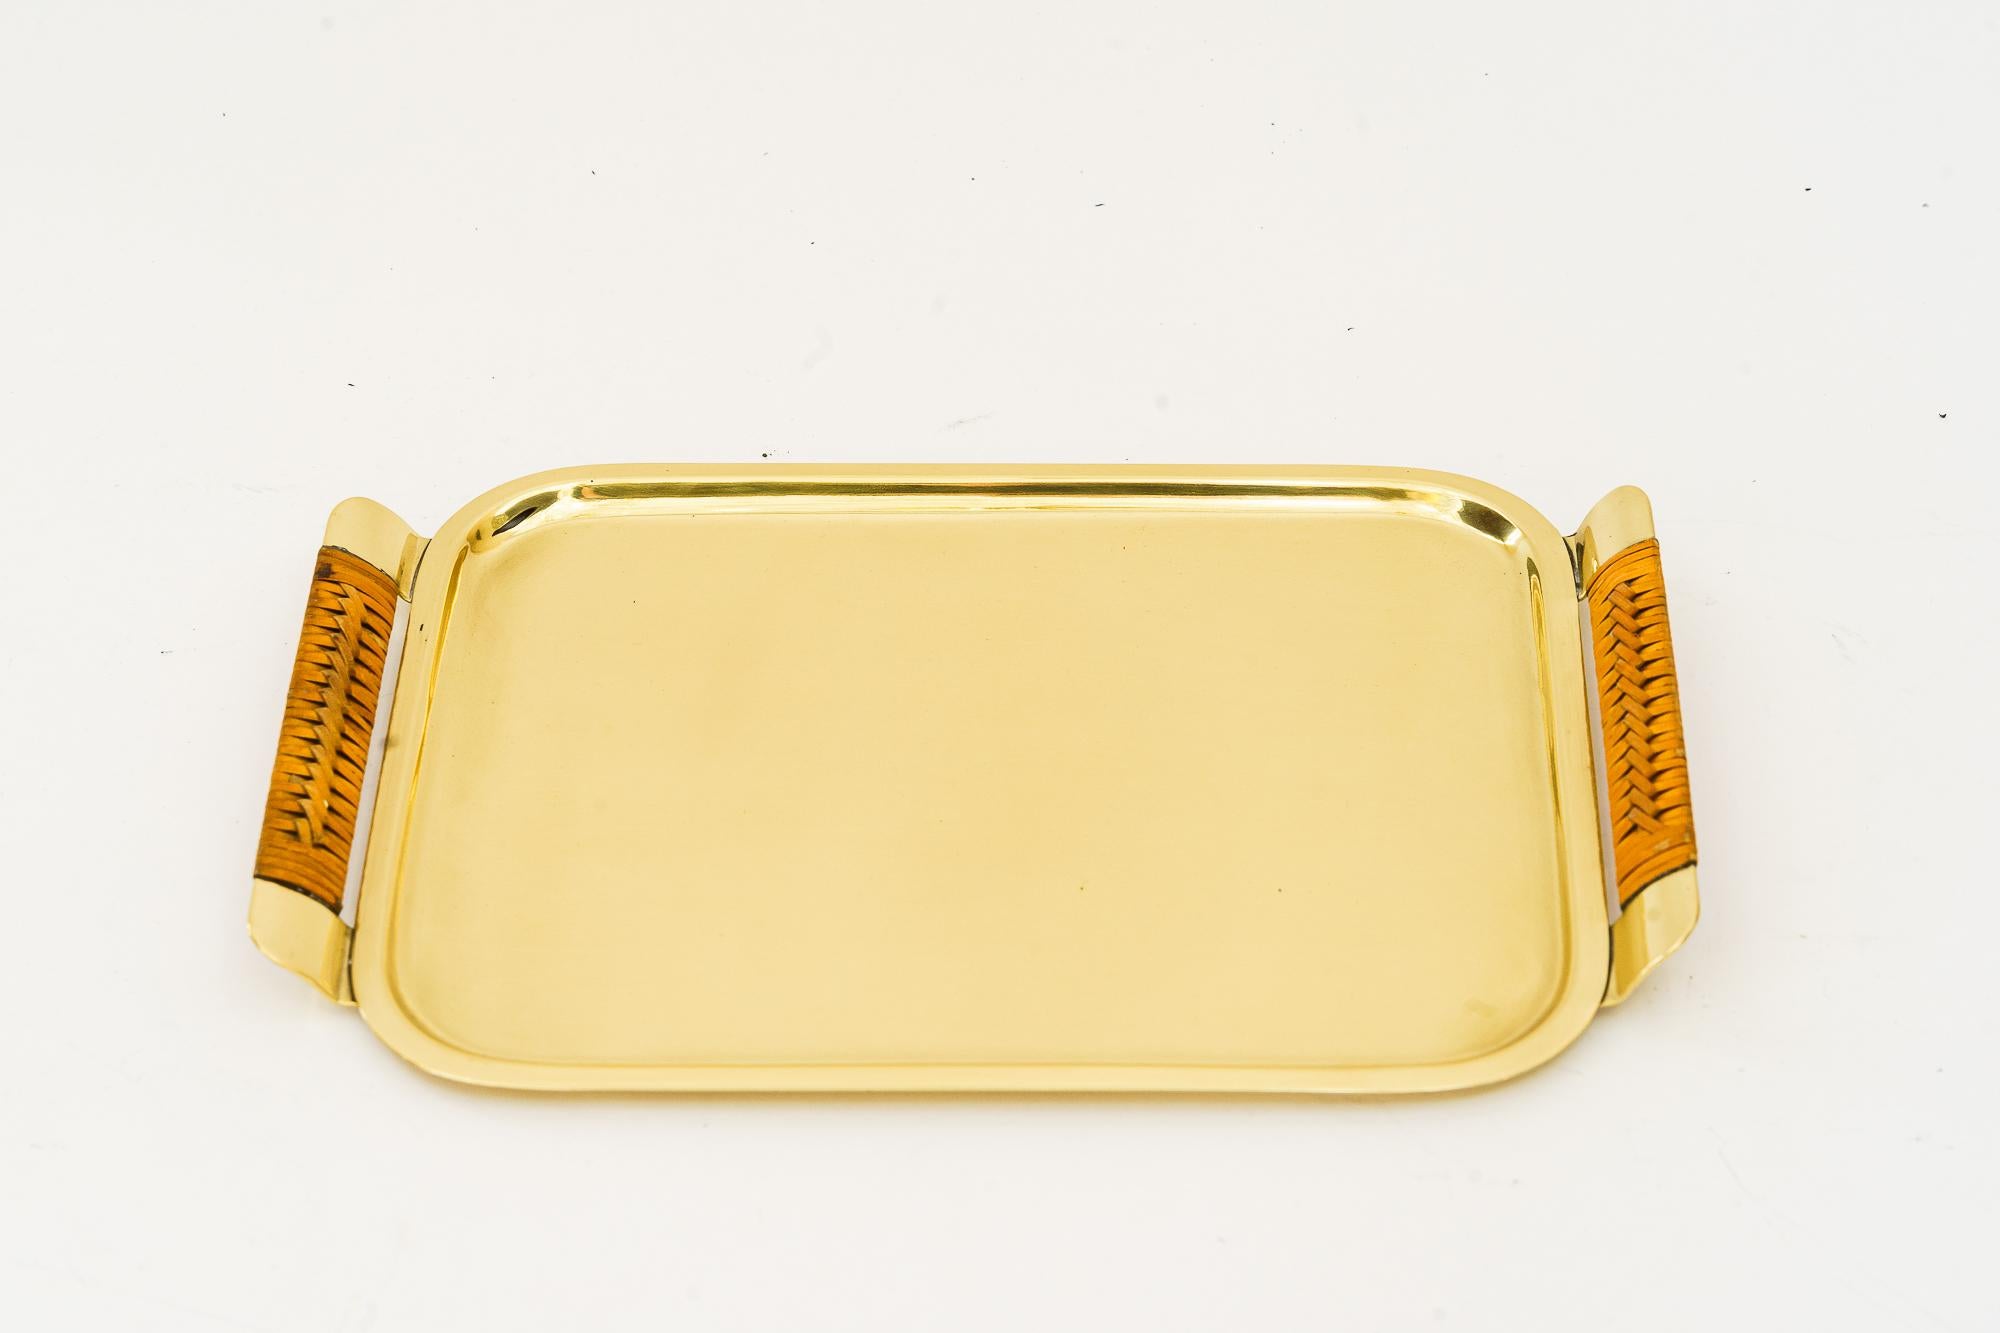 Serving plate vienna around 1950s
Brass polished and stove enameled
